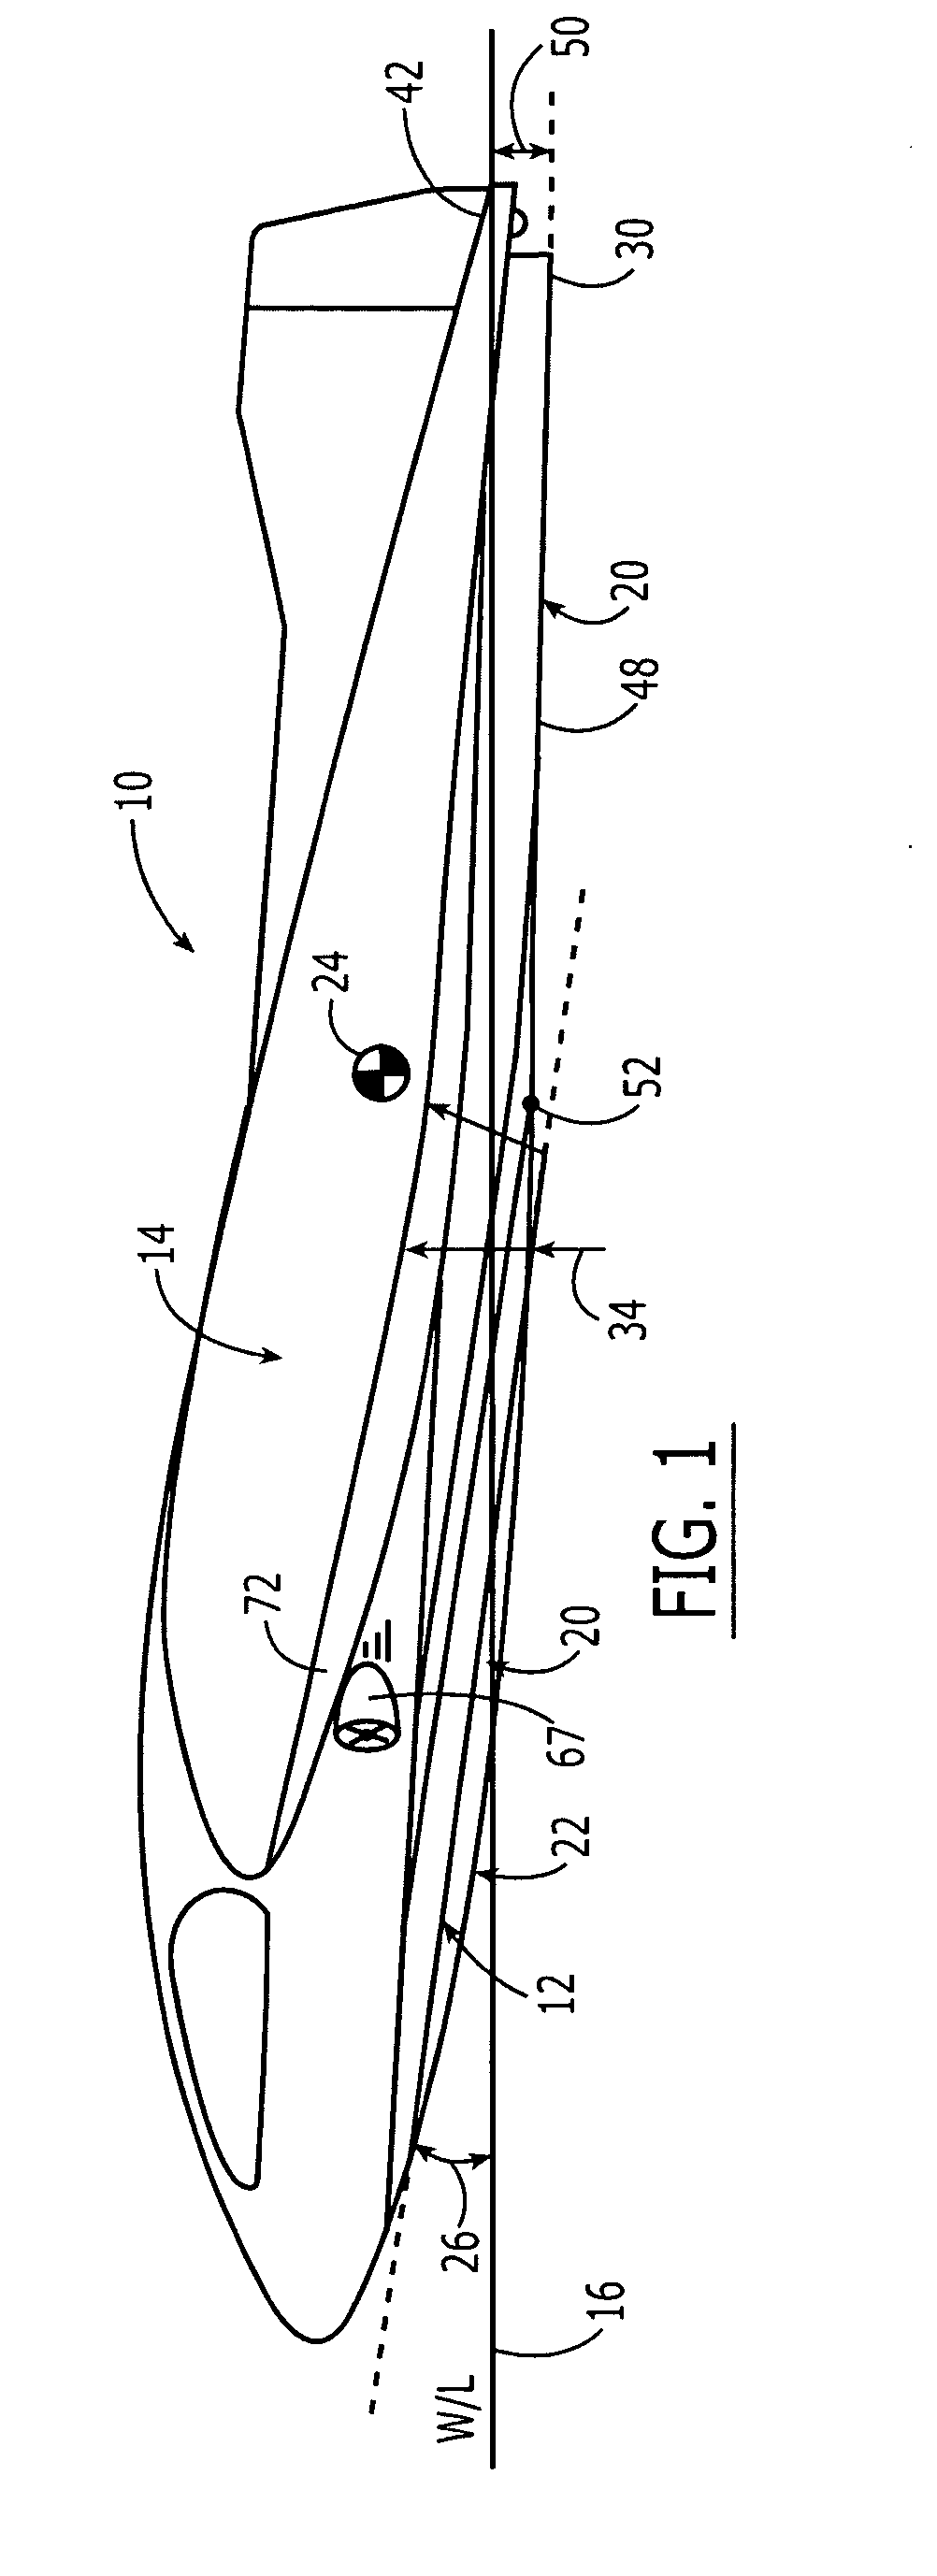 Transportation vehicle and method operable with improved drag and lift